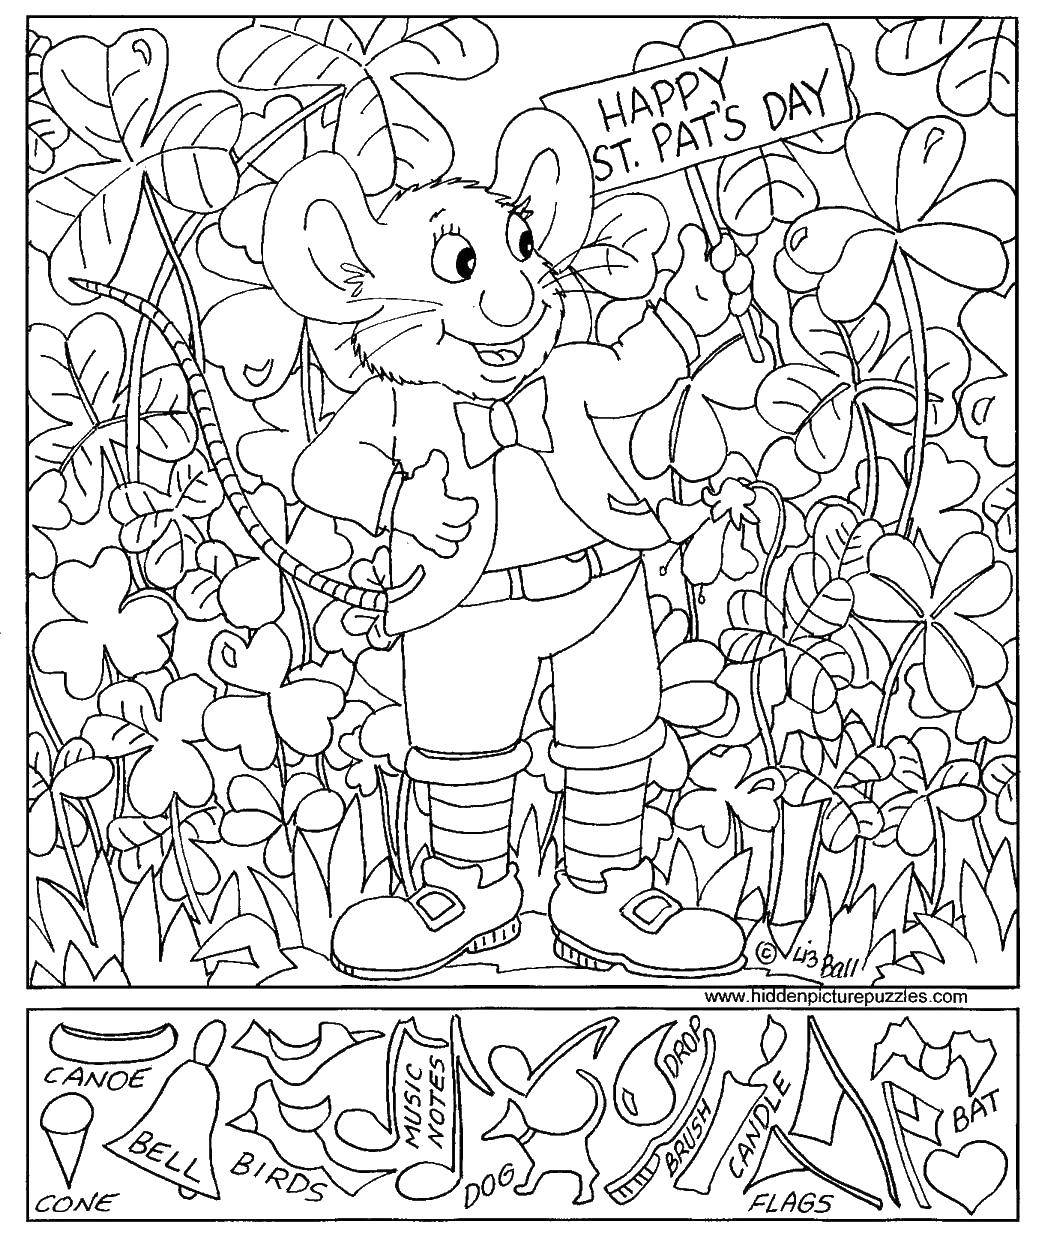 Coloring Mouse in the grass. Category Find items. Tags:  puzzles, mouse.